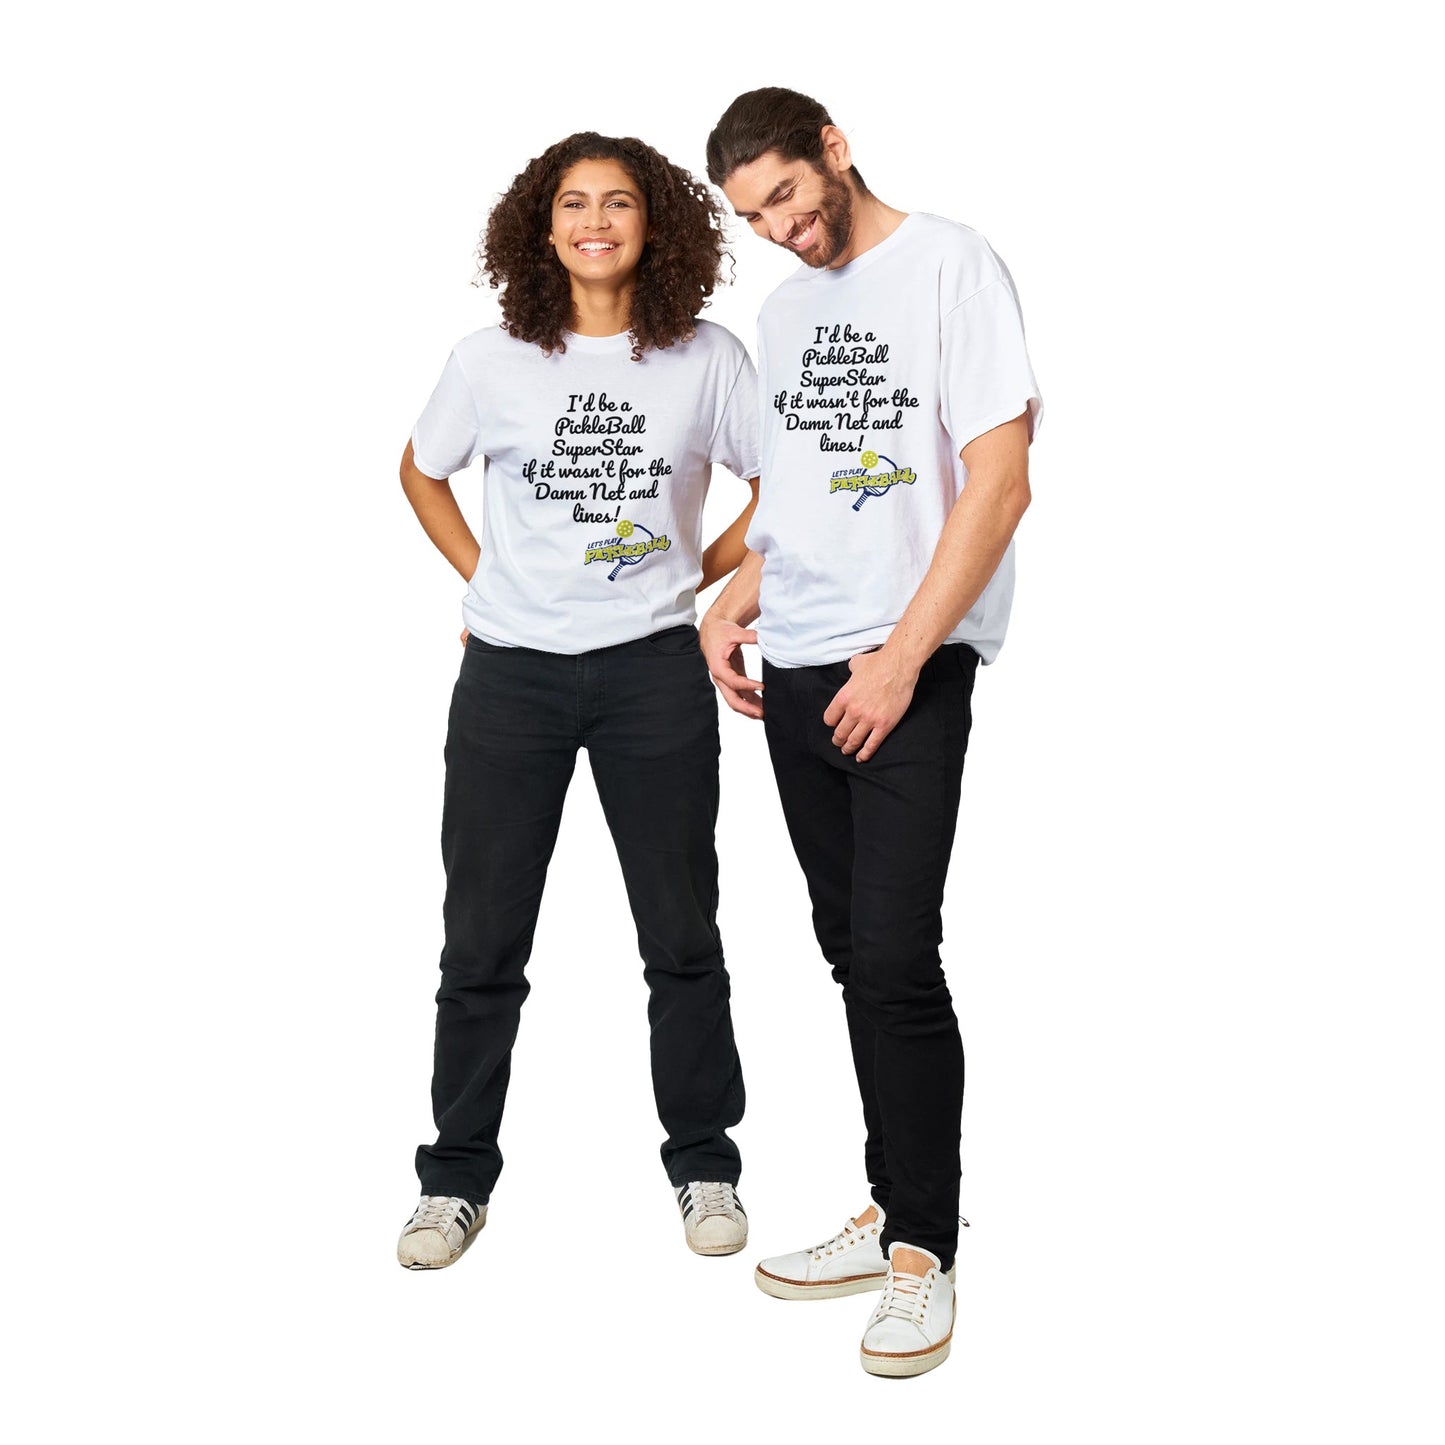 A white comfortable Unisex Crewneck heavyweight cotton t-shirt with funny saying saying I’d be a PickleBall SuperStar if it wasn’t for the Damn Net and Lines and Let’s Play Pickleball logo on the front from WhatYa Say Apparel worn by Happy woman and man couple standing side by side.